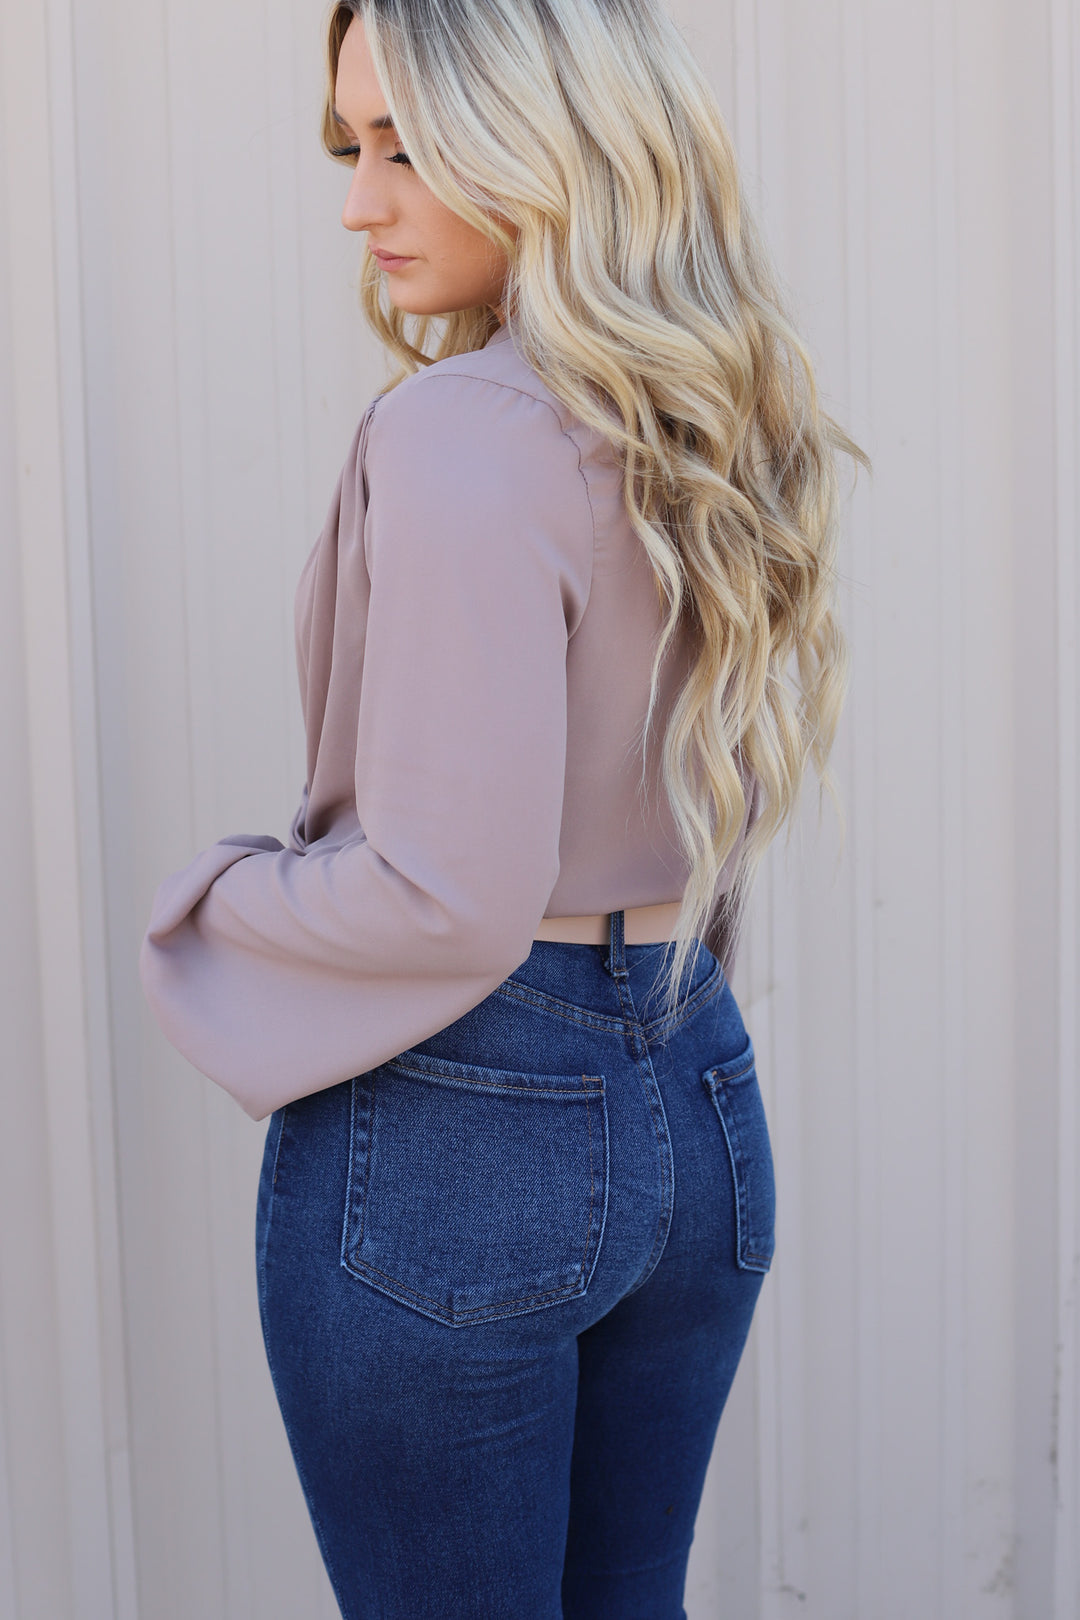 Made You Look Bodysuit - ShopSpoiled